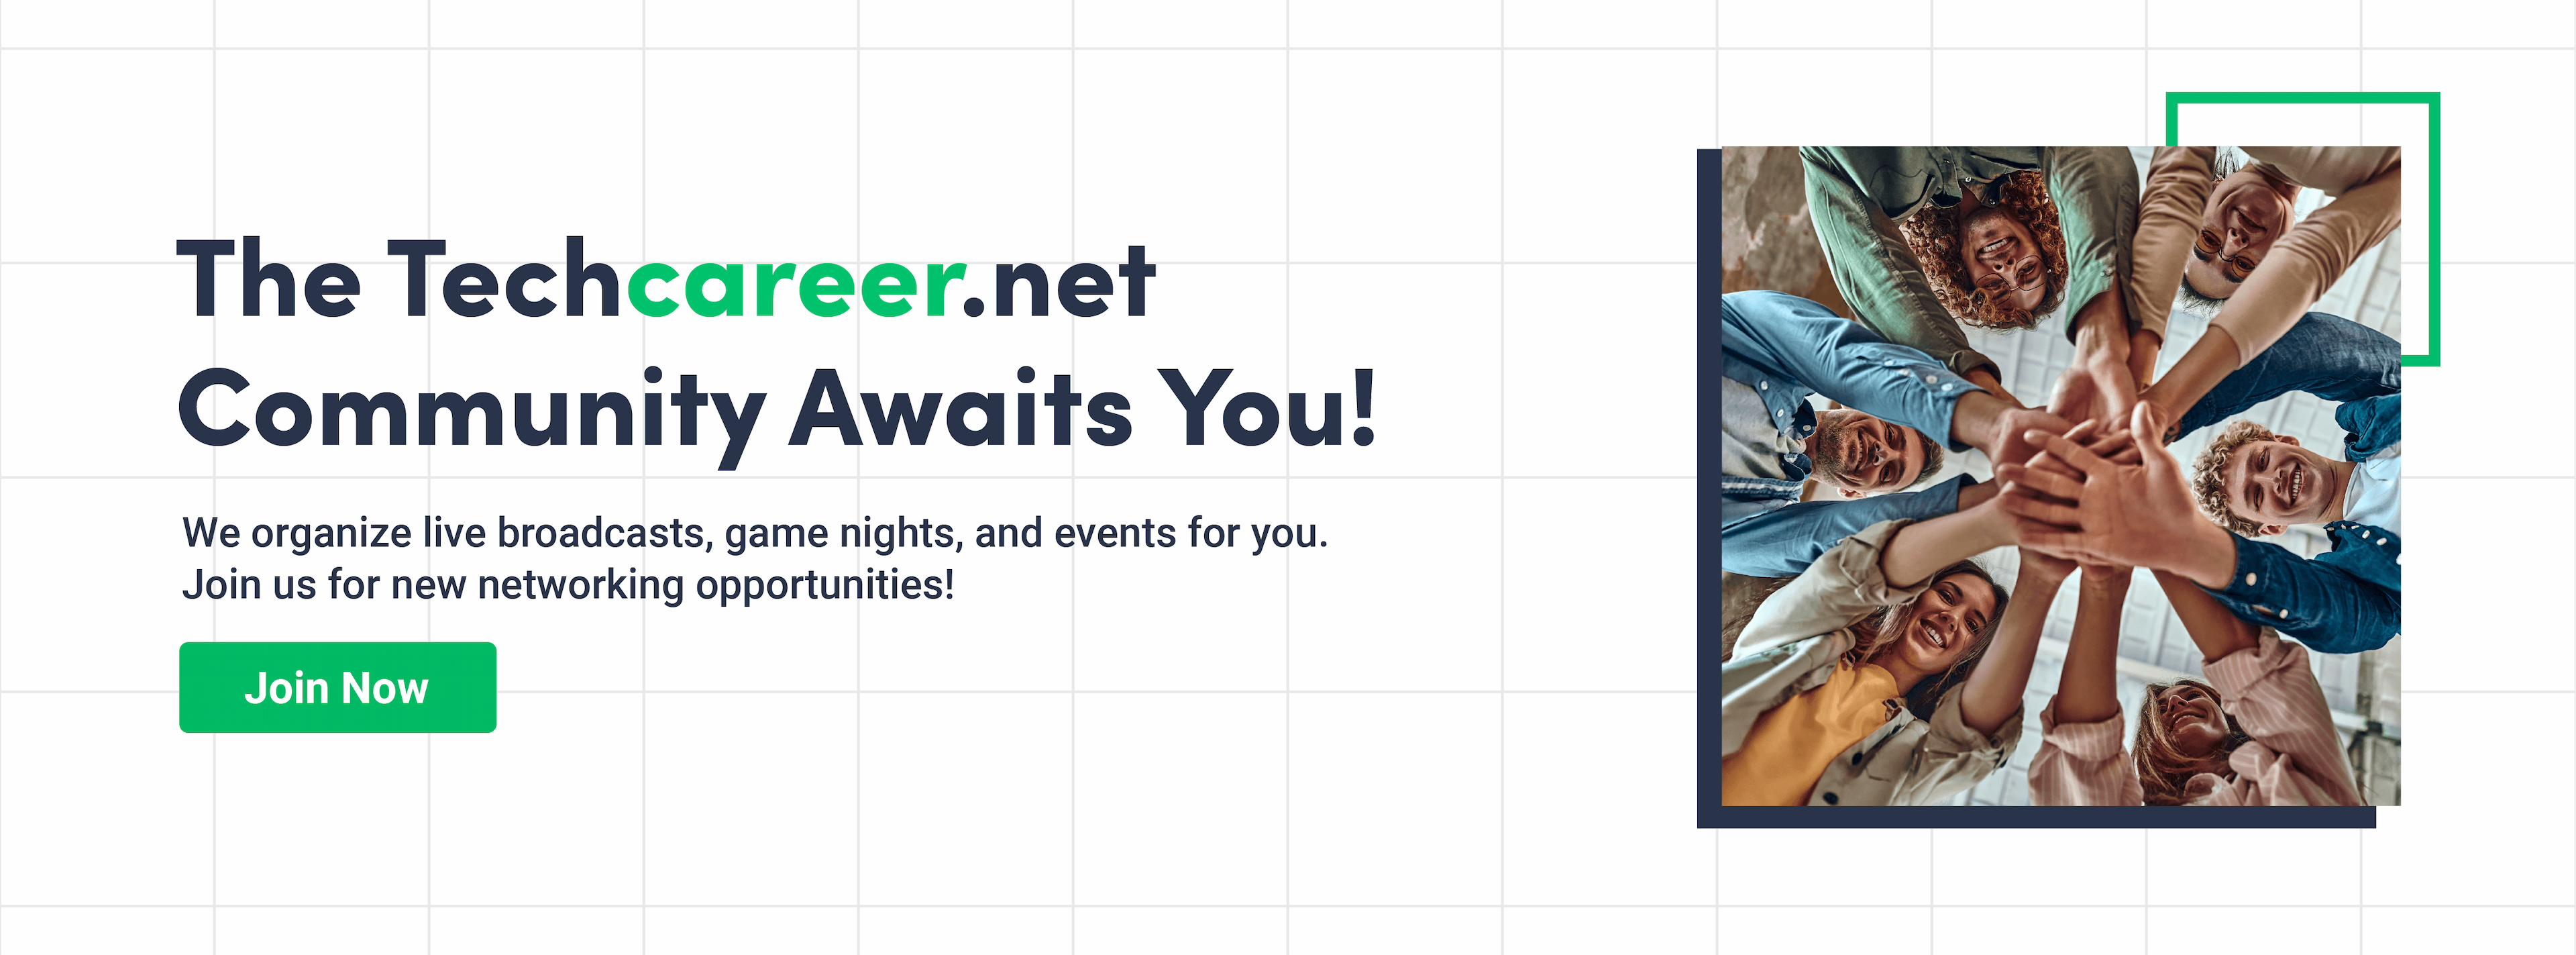 techcareer.net Community is Waiting for You!